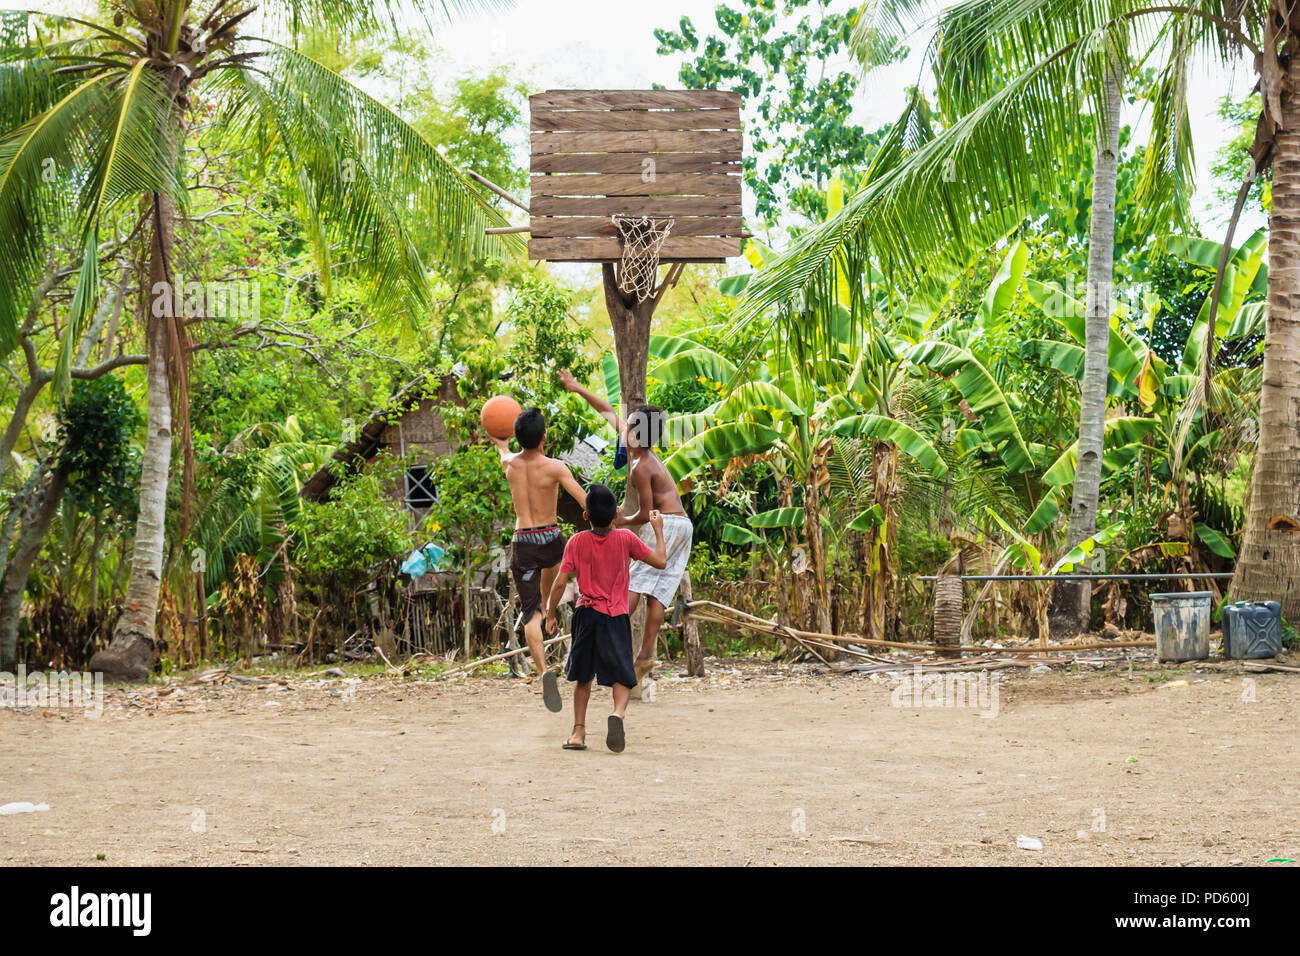 Sandugan, Siquijor, Philippines - May 13 2013: Three kids playing basketball at sand field with old wooden basketball basket Stock Photo